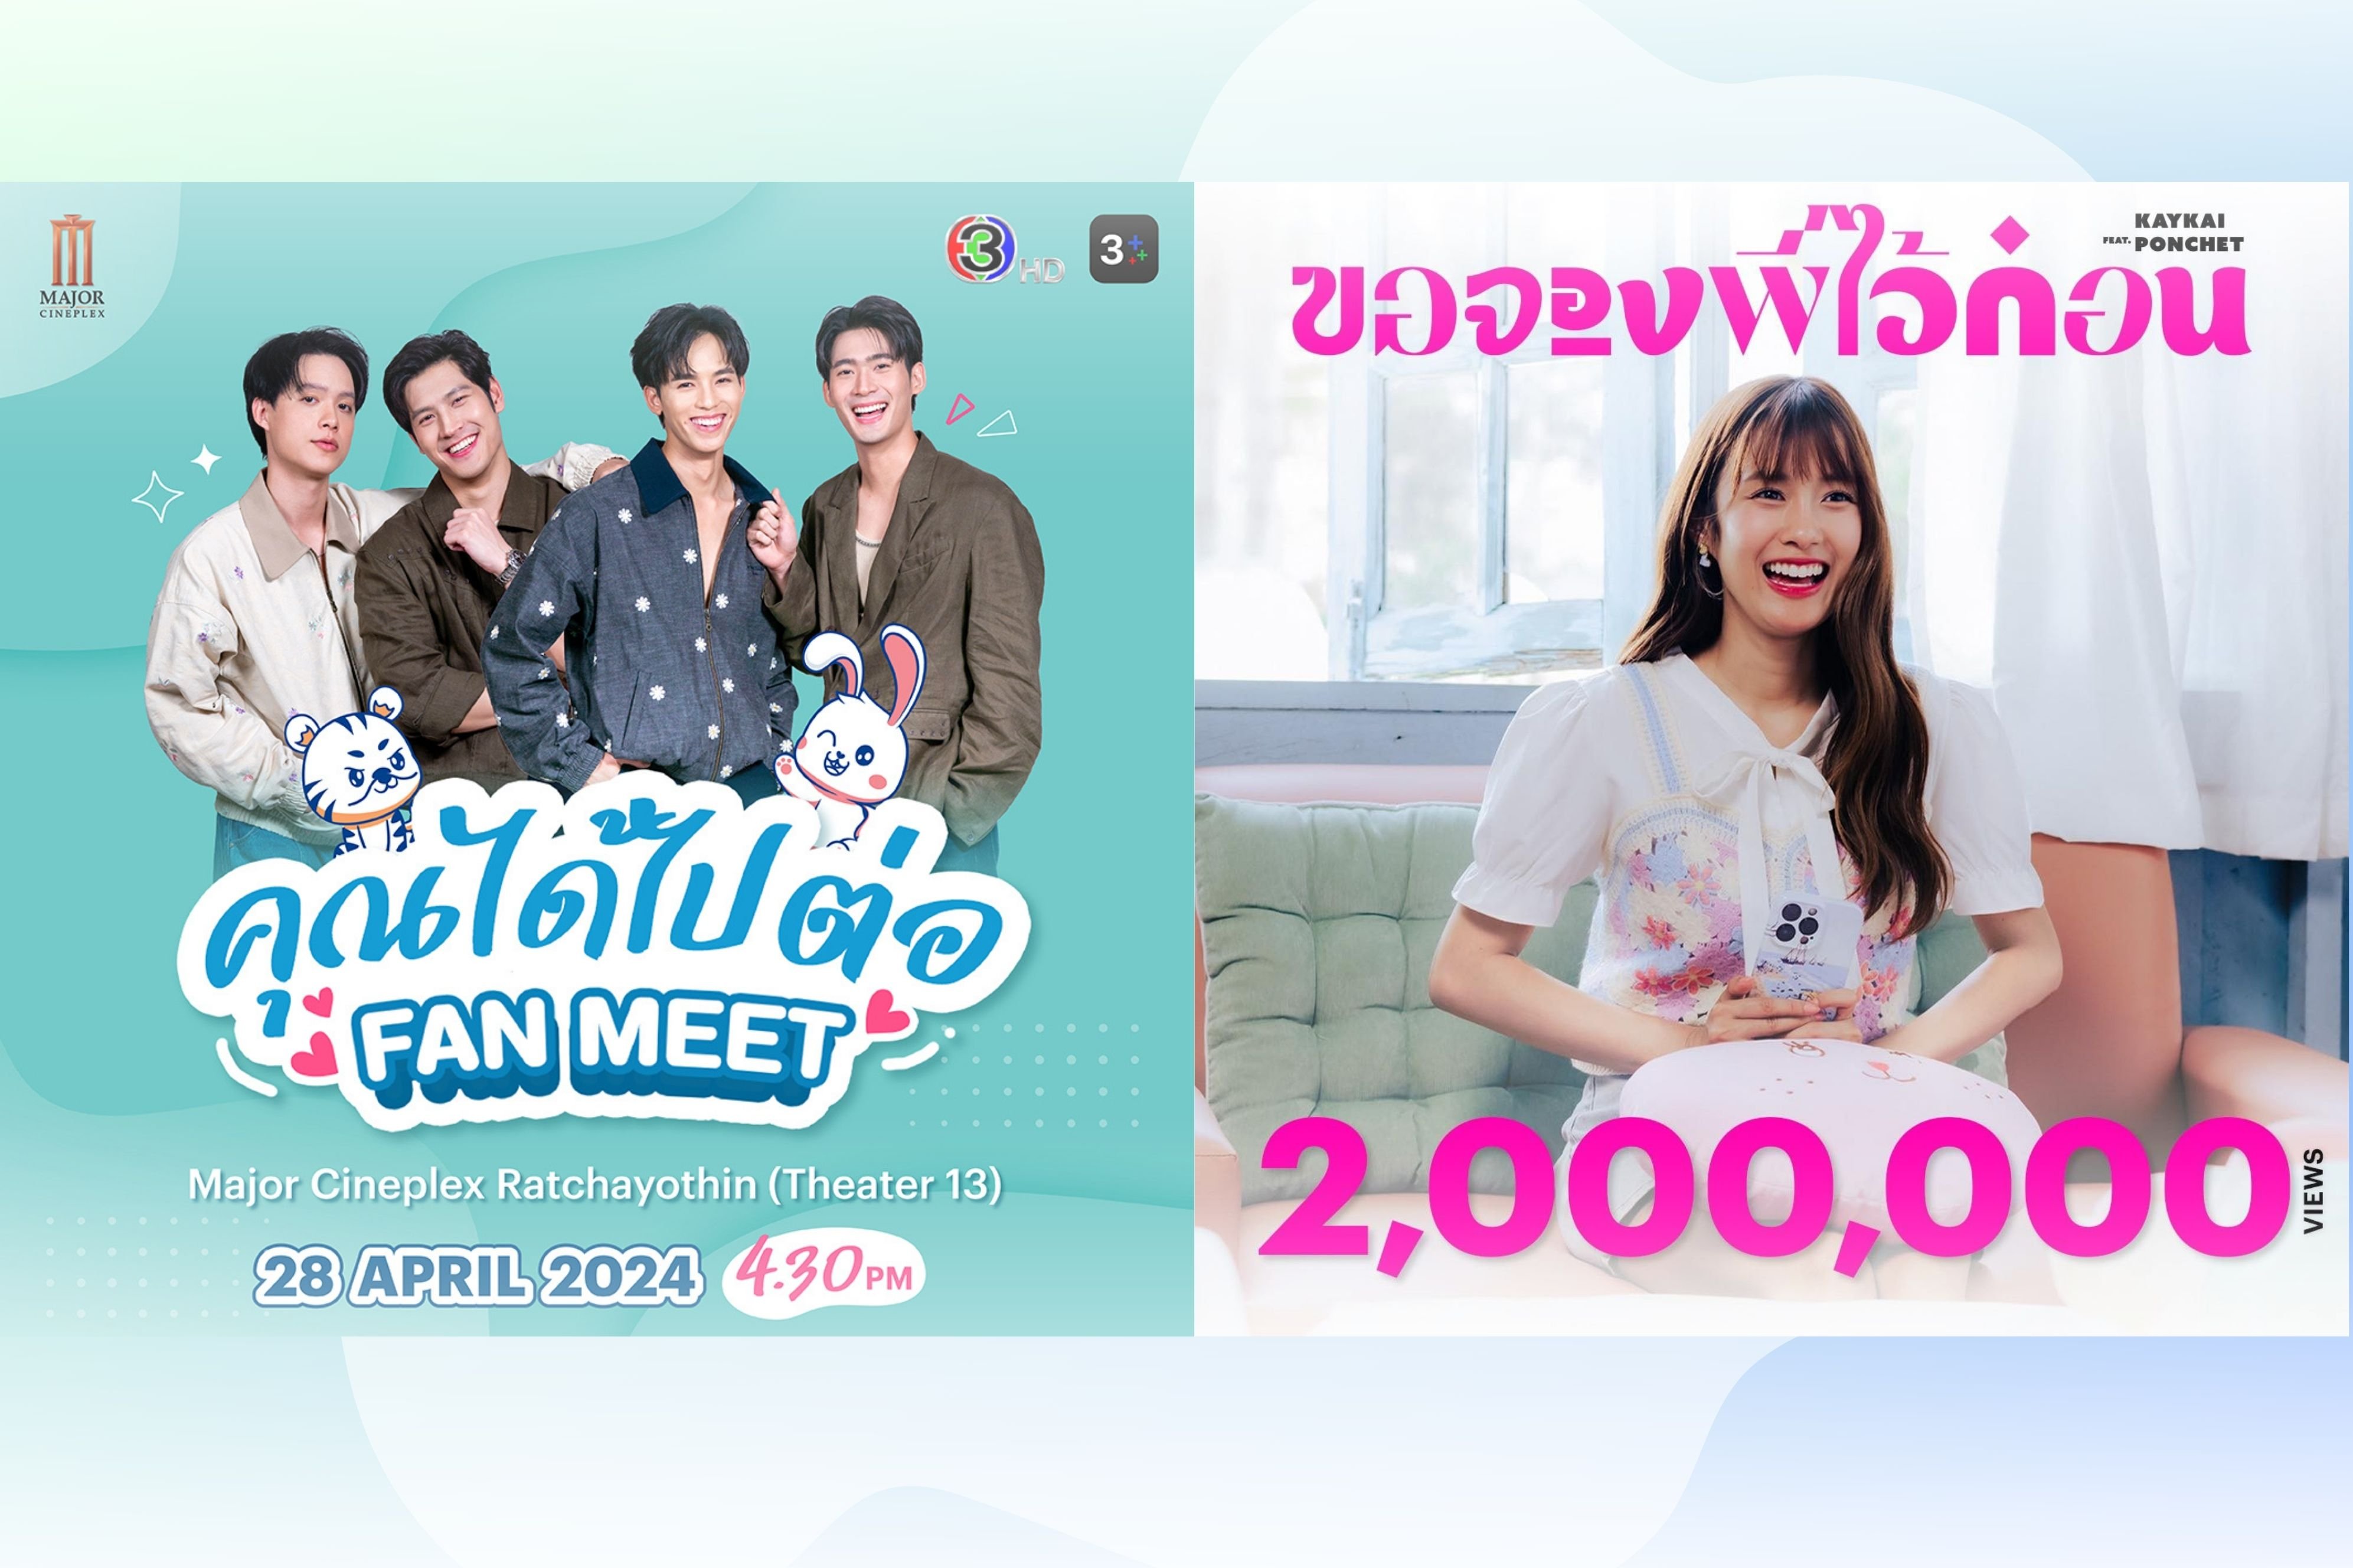 Channel 3 uplifted its offers beyond contents with music and series Y fan meeting